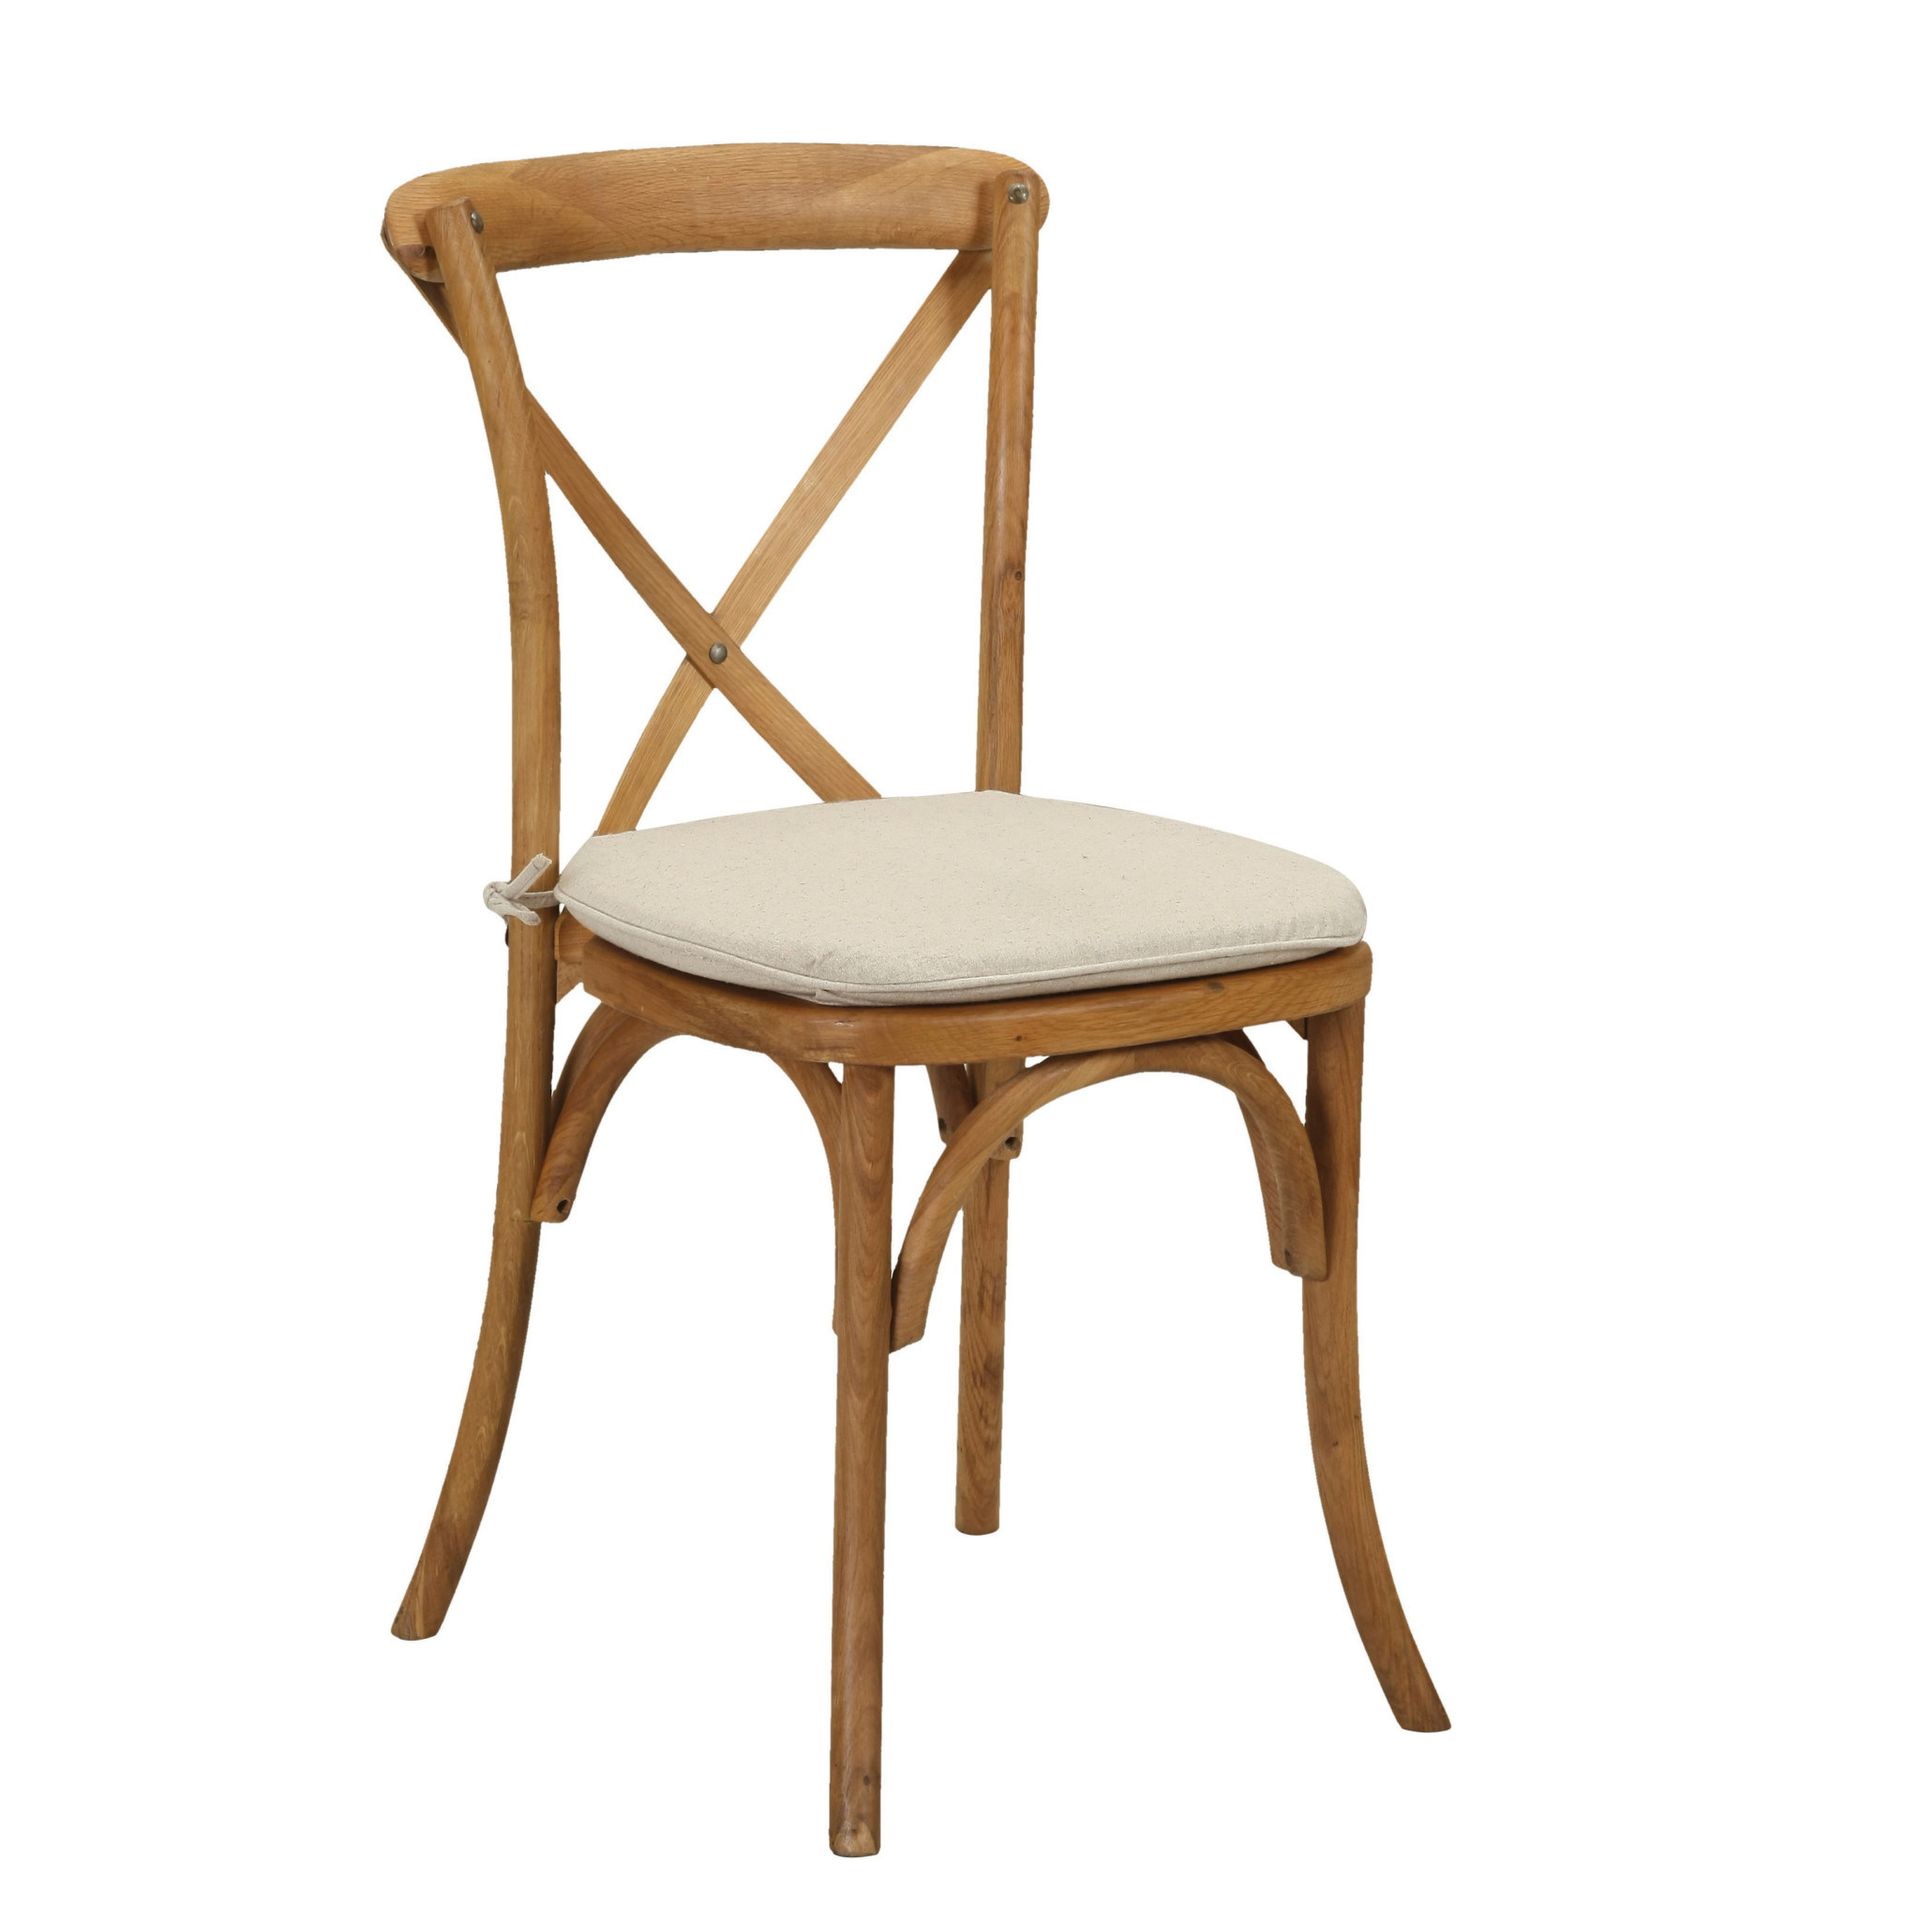 Fruitwood X Back Chair with Pad